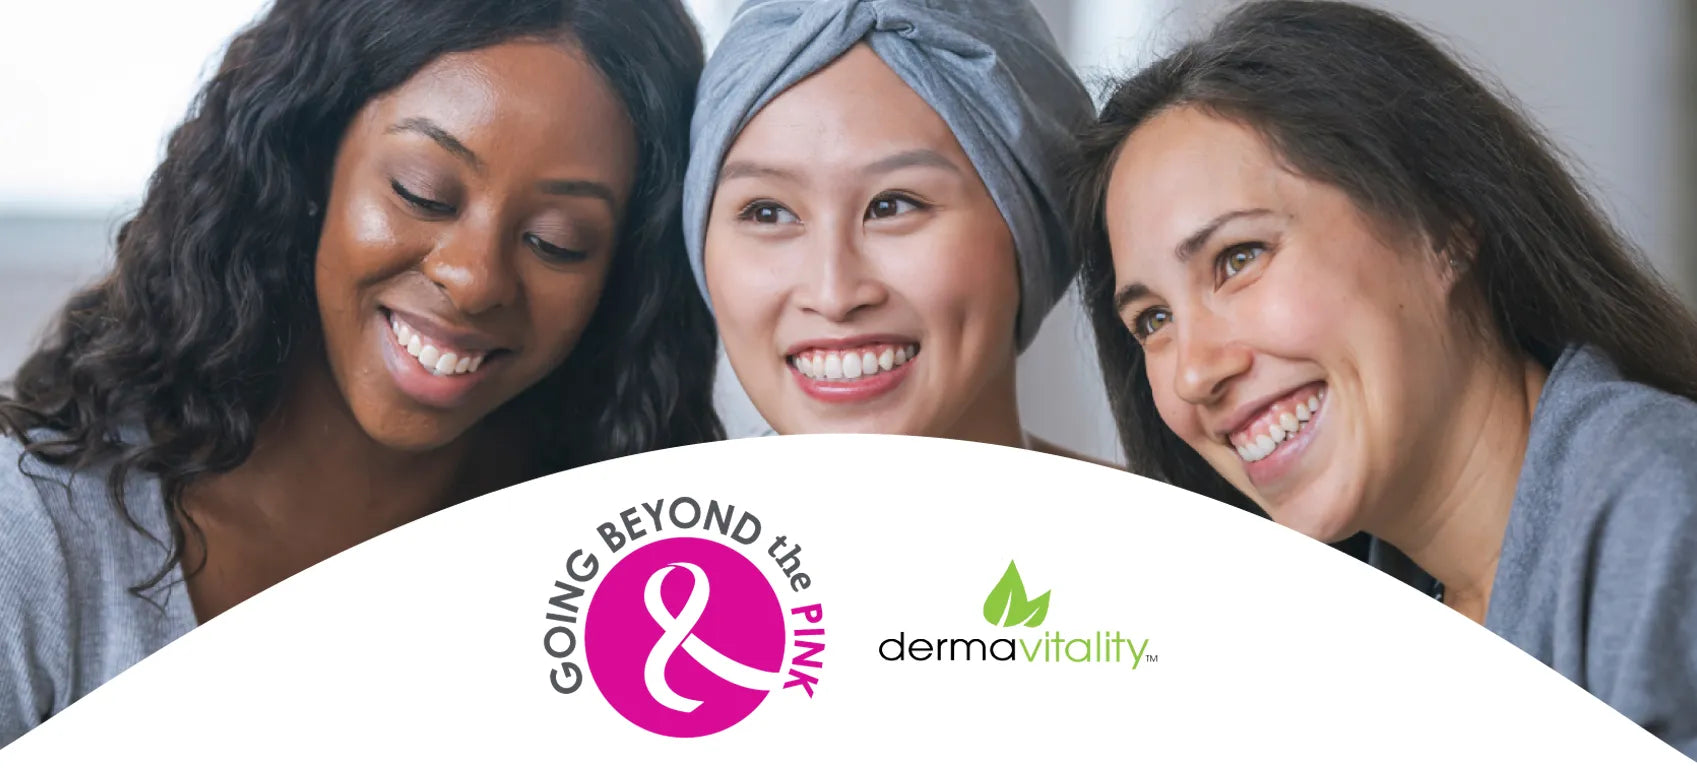 Going Beyond the Pink’s mission is to empower breast cancer patients and survivors